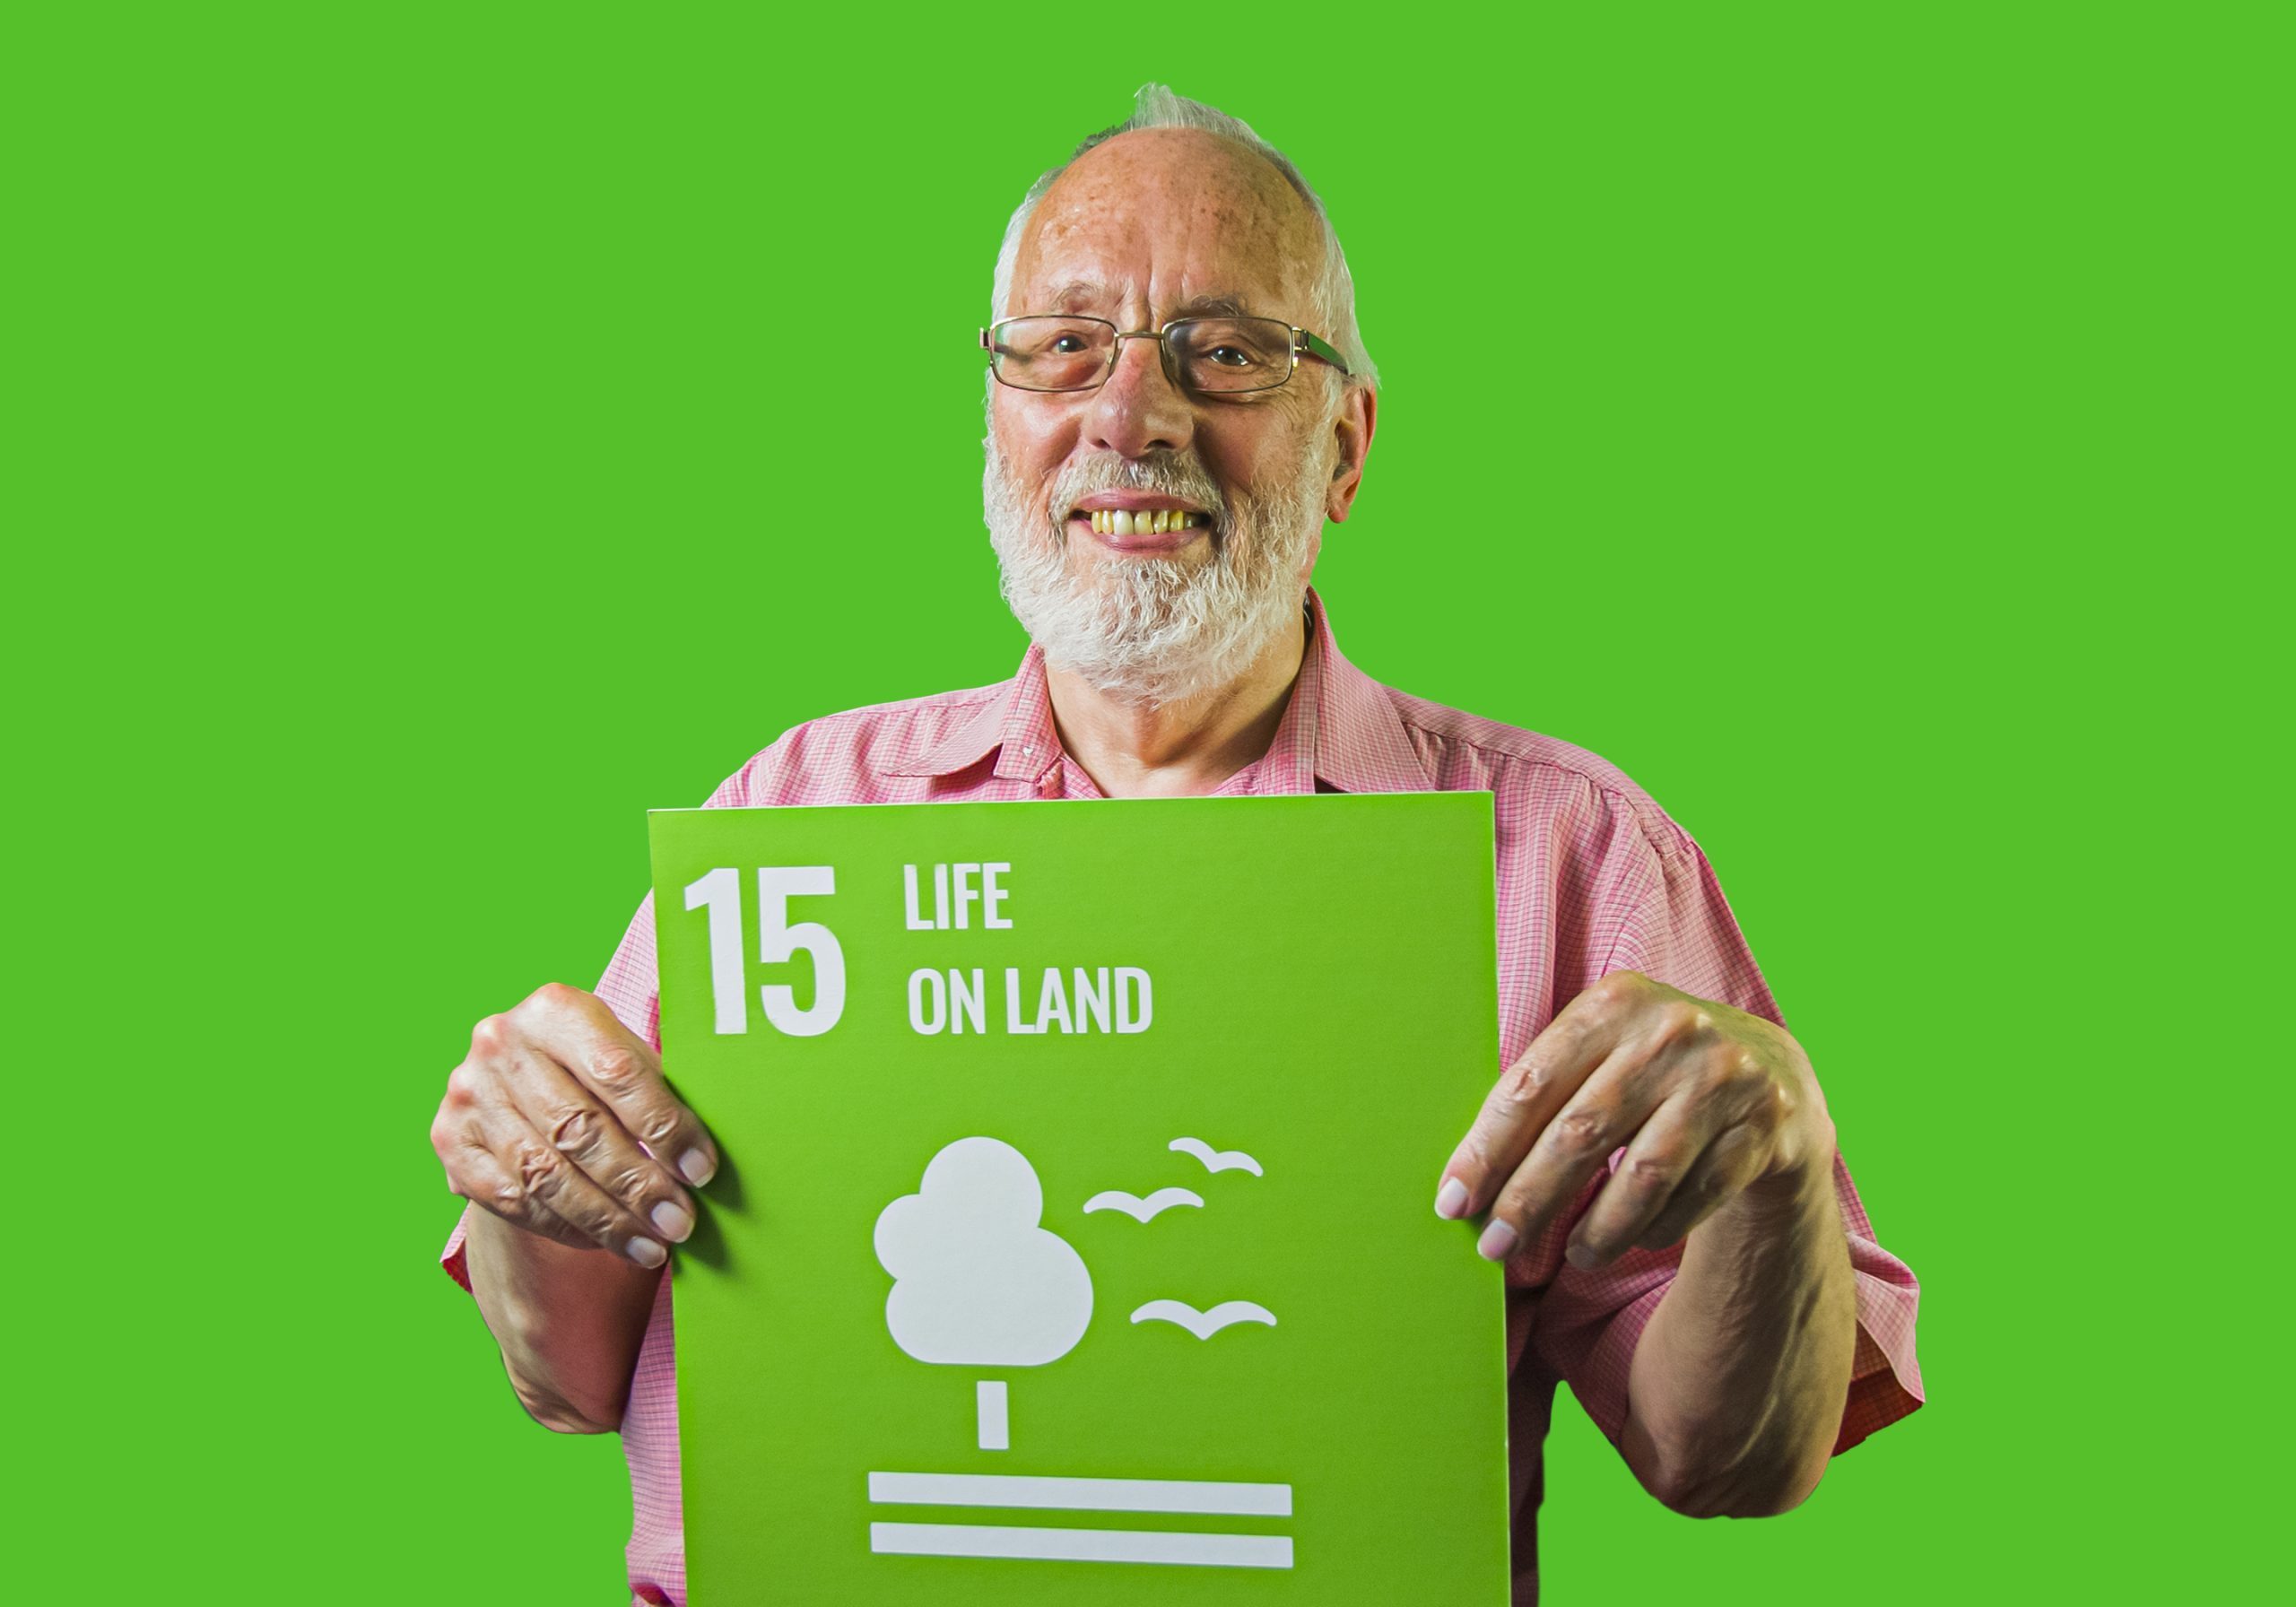 Man holding up sign showing Global Sustainable Development Goal 15, life on land.